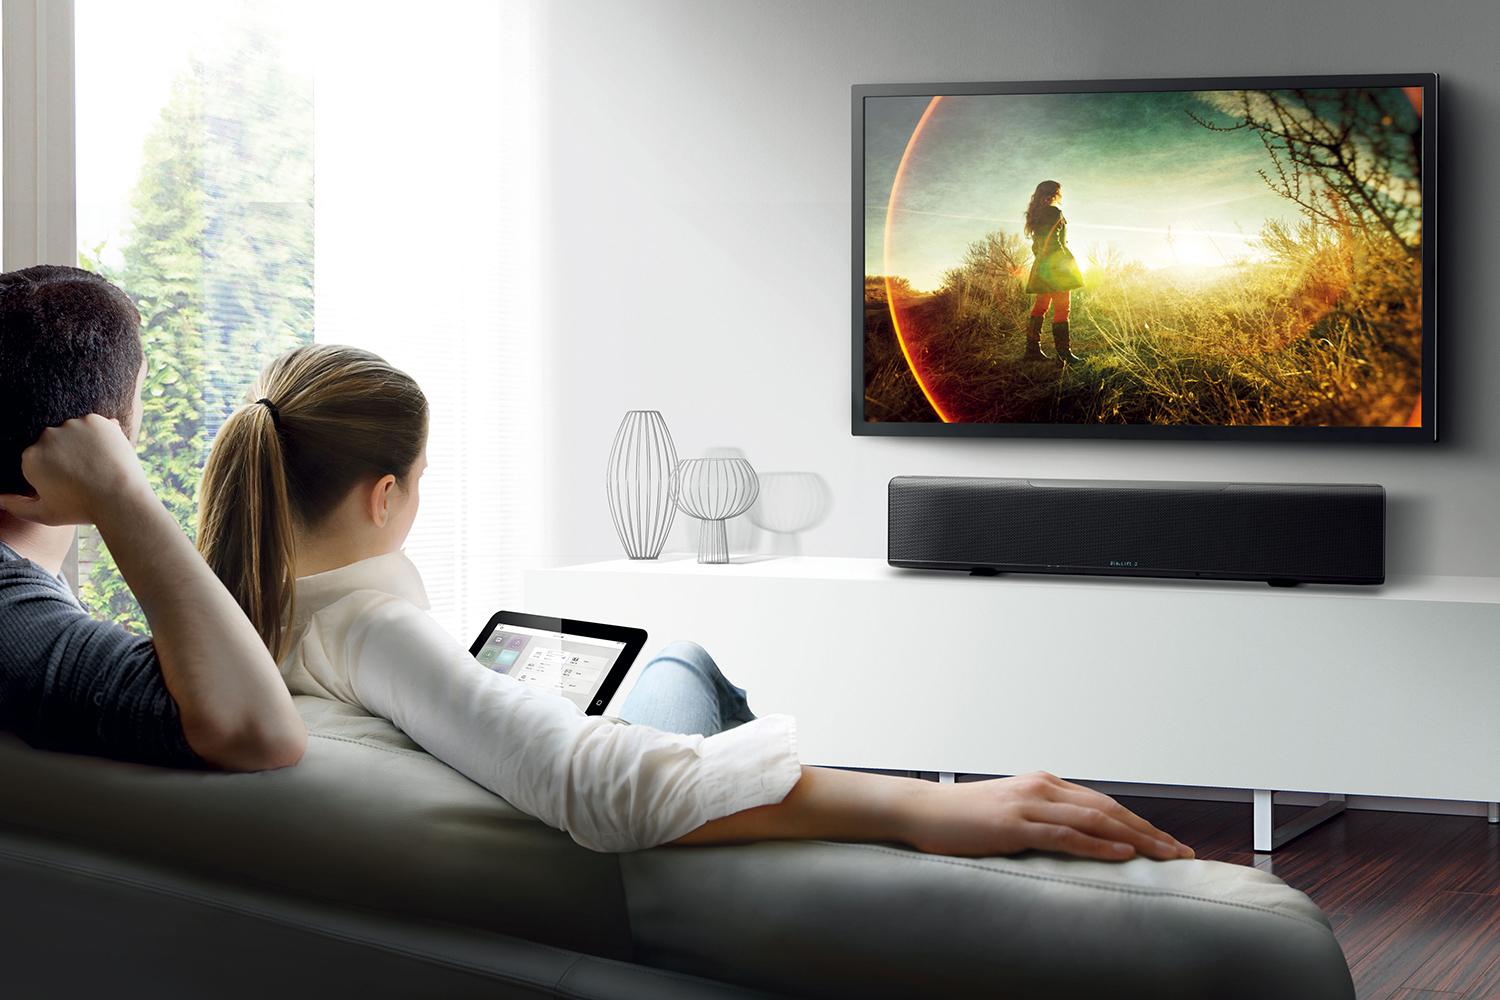 Uncle or Mister something Convenient Check out Yamaha's Epic Dolby Atmos Surround Sound Bar | Digital Trends